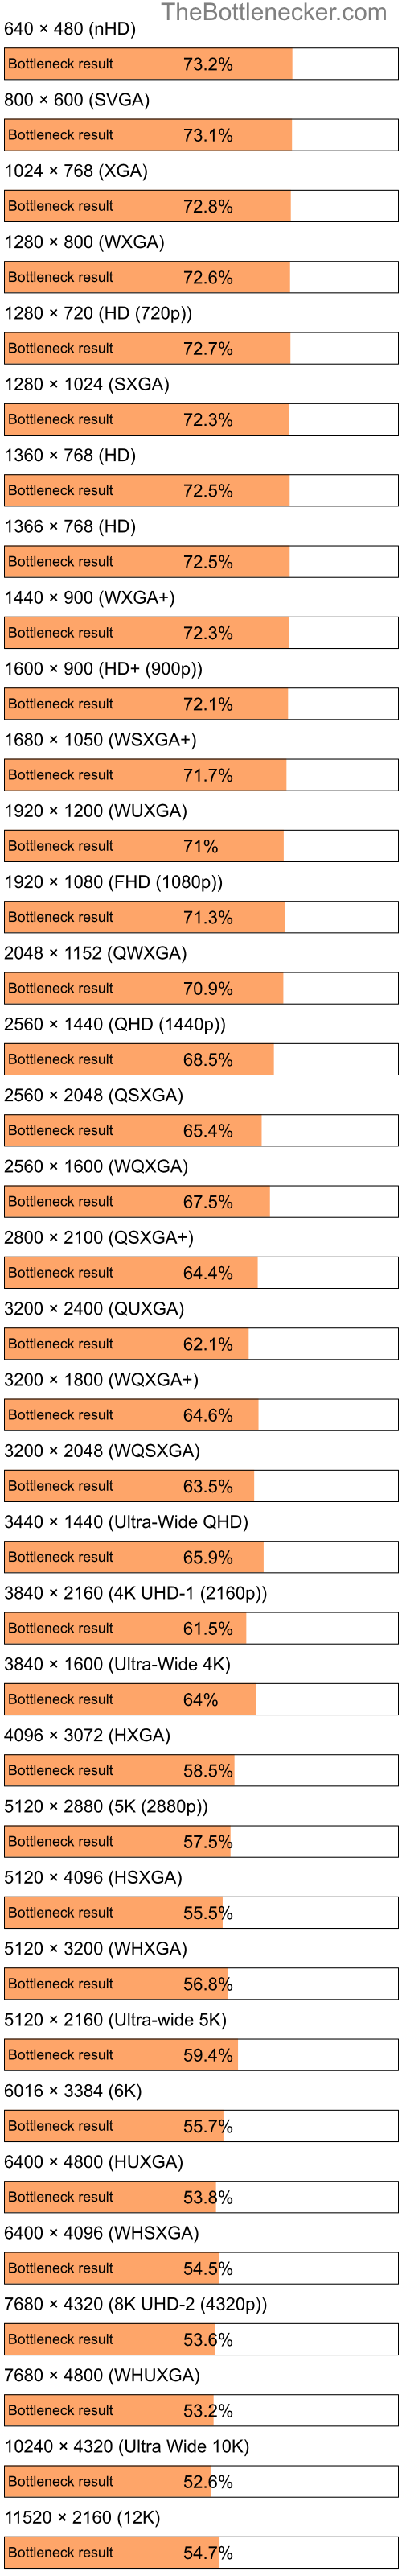 Bottleneck results by resolution for Intel Core i7-2640M and NVIDIA GeForce RTX 4090 in Graphic Card Intense Tasks